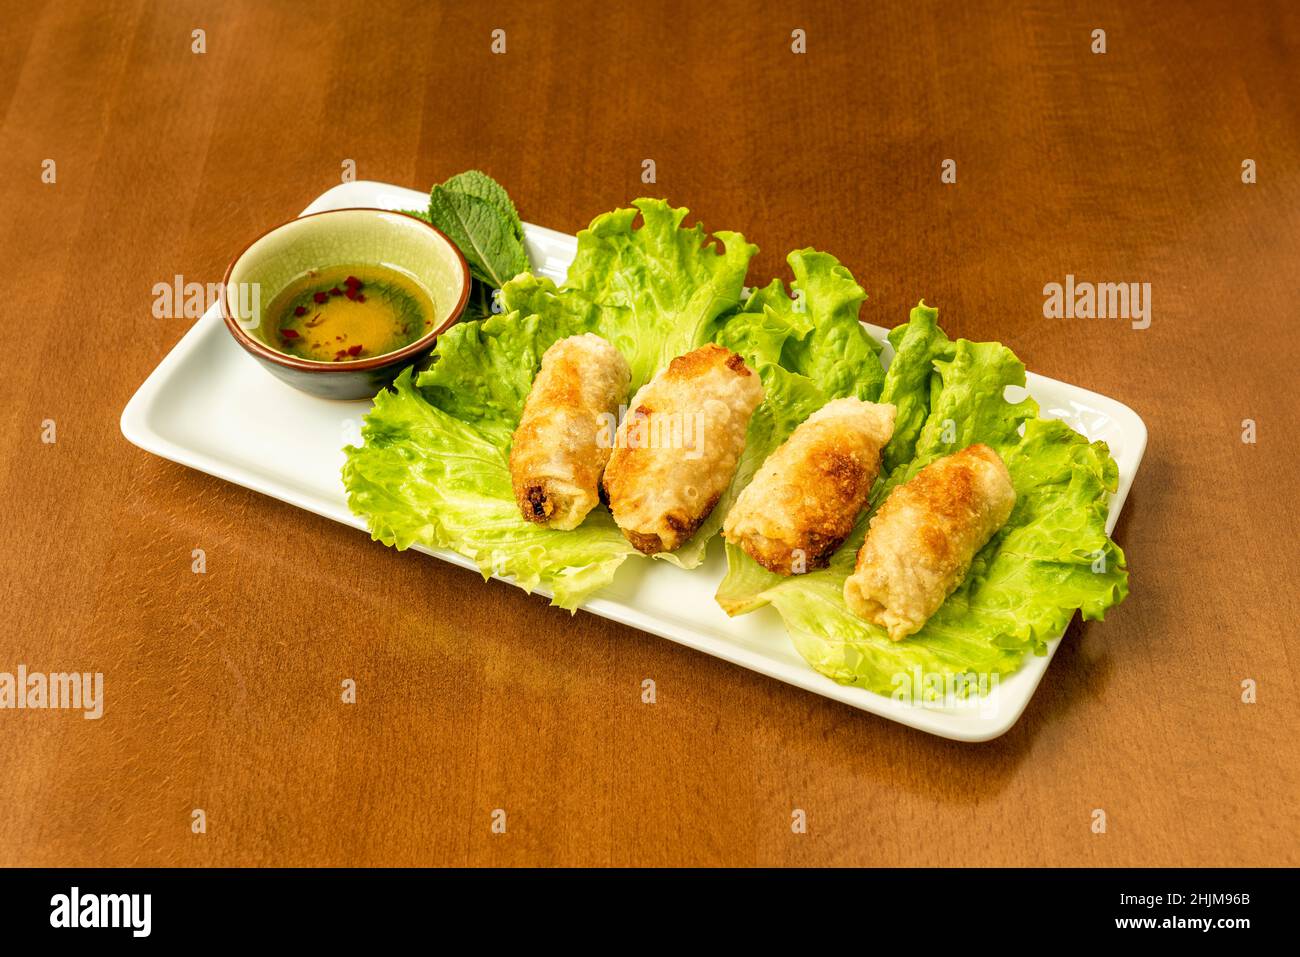 nem rán, is a popular dish in Vietnamese cuisine that is often served as an appetizer in Europe and North America, where there is a large Vietnamese d Stock Photo